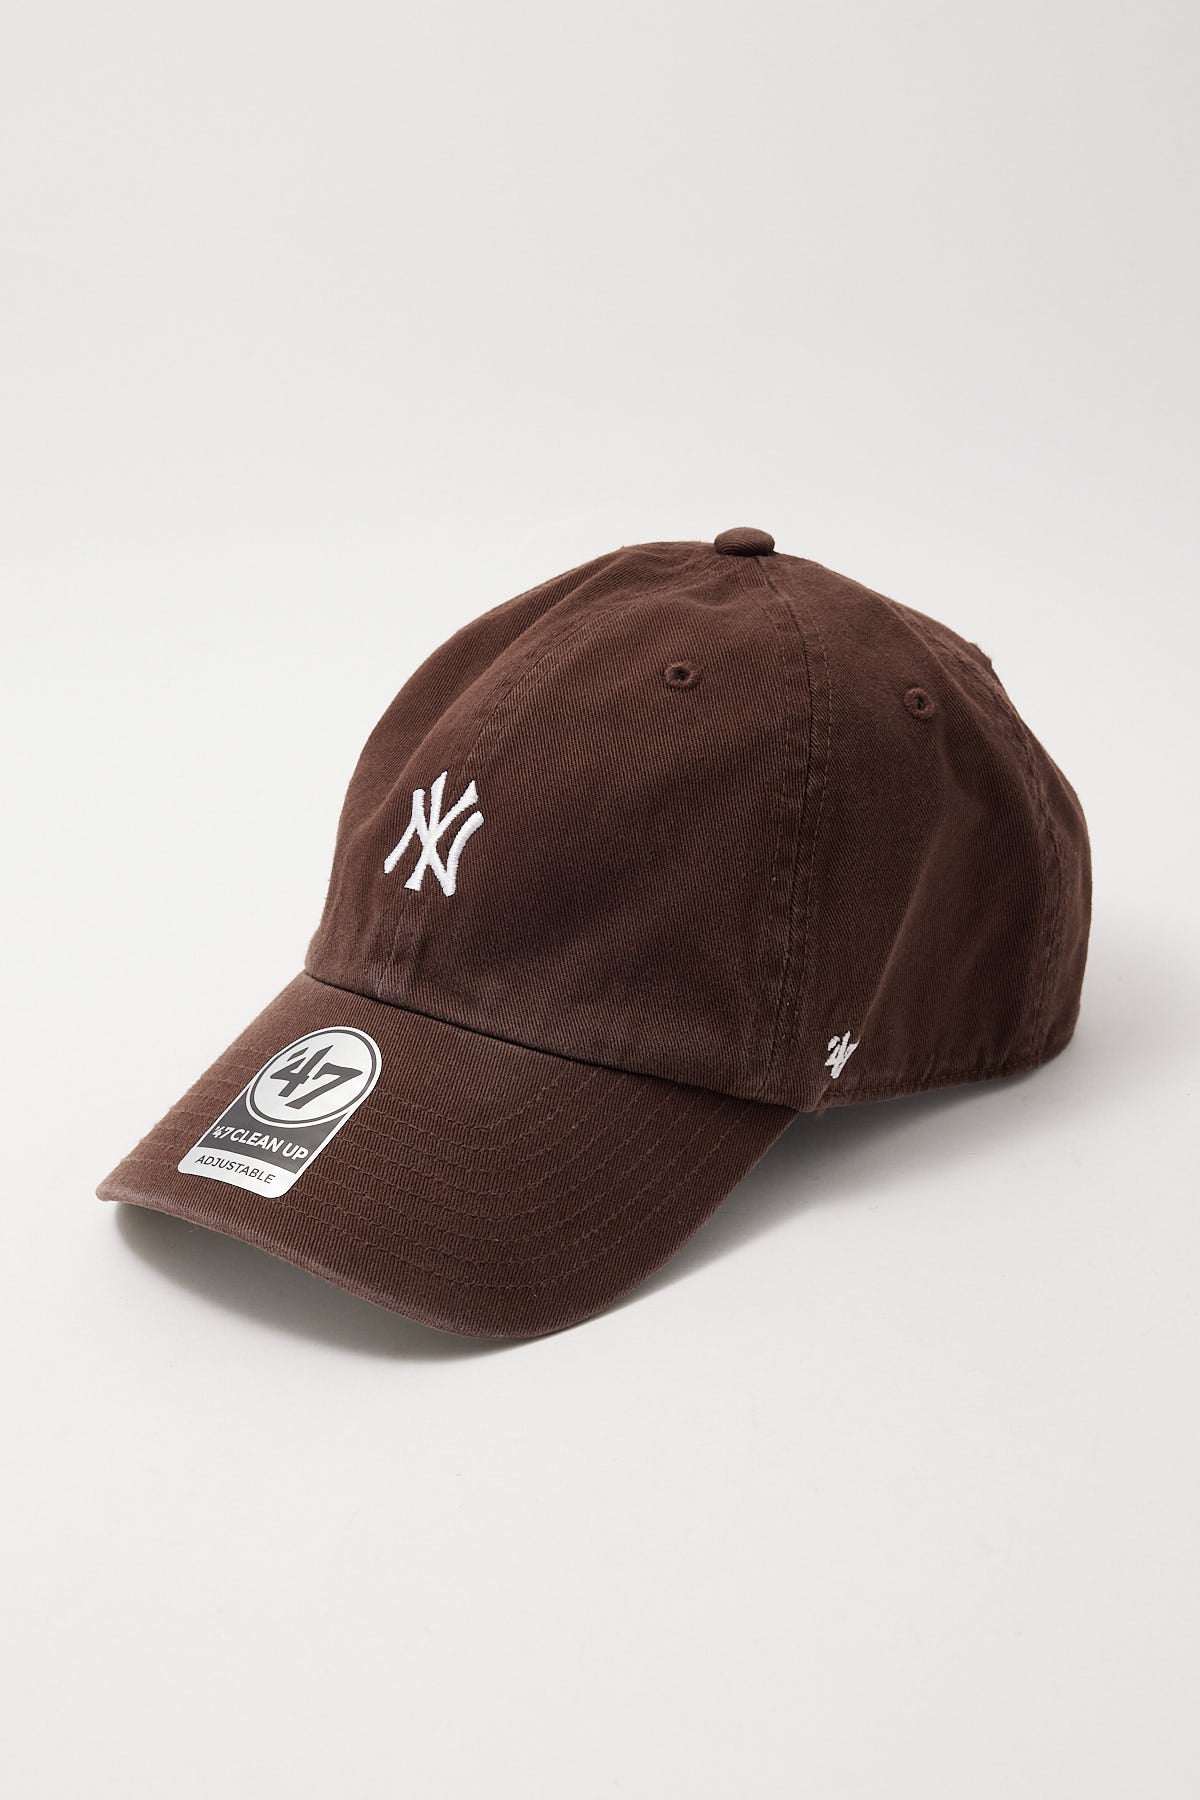 47 Brand Clean Up Baserunner NY Yankees Brown